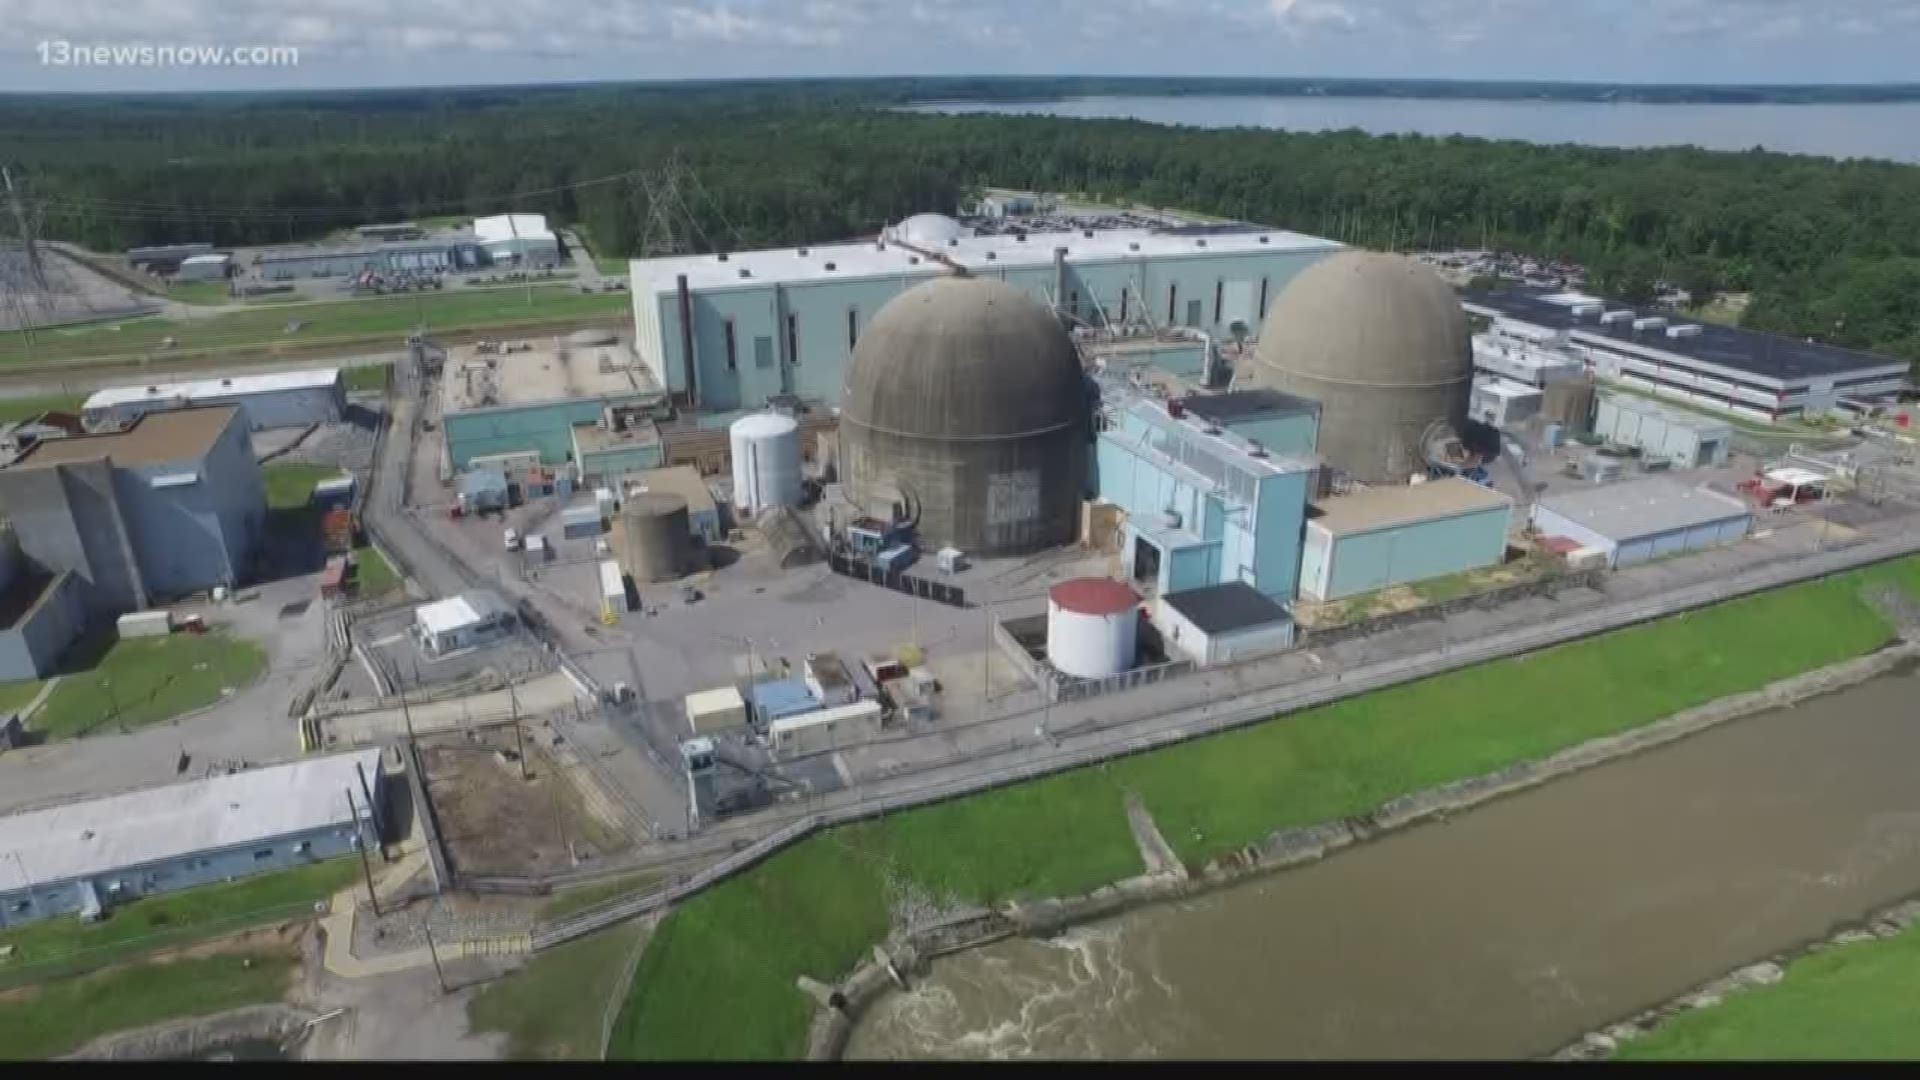 Dominion Energy's Surry Power Plant is the very first of Virginia's two nuclear stations to file for a renewed, 20-year operating license